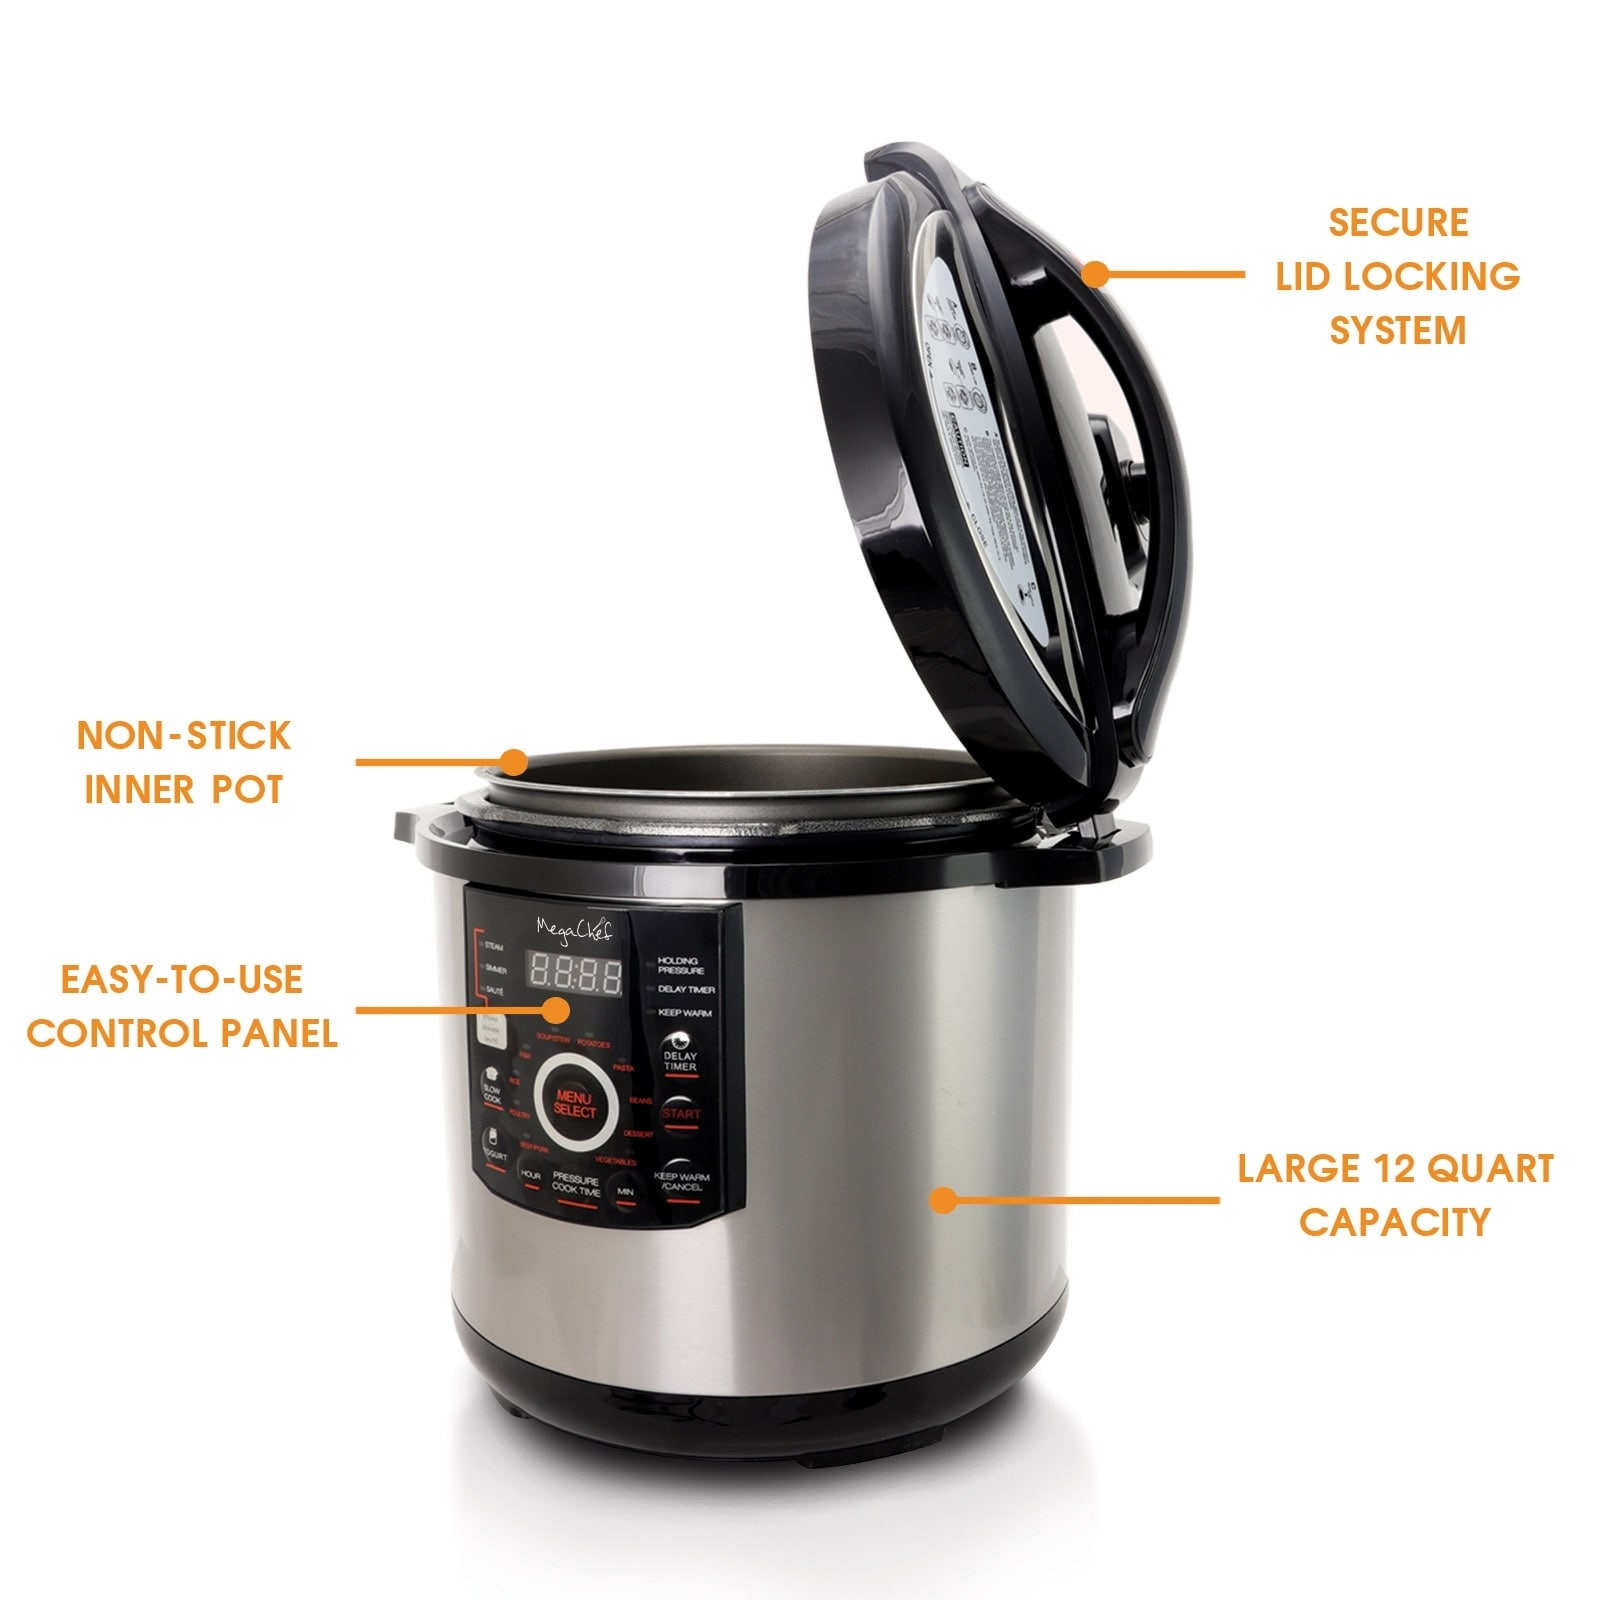 https://ak1.ostkcdn.com/images/products/is/images/direct/2b4206517a0fdc3cc07aac1f2319d96e5c480fb6/MegaChef-Digital-Pressure-Cooker-and-Lid-with-12-Quart-Capacity.jpg